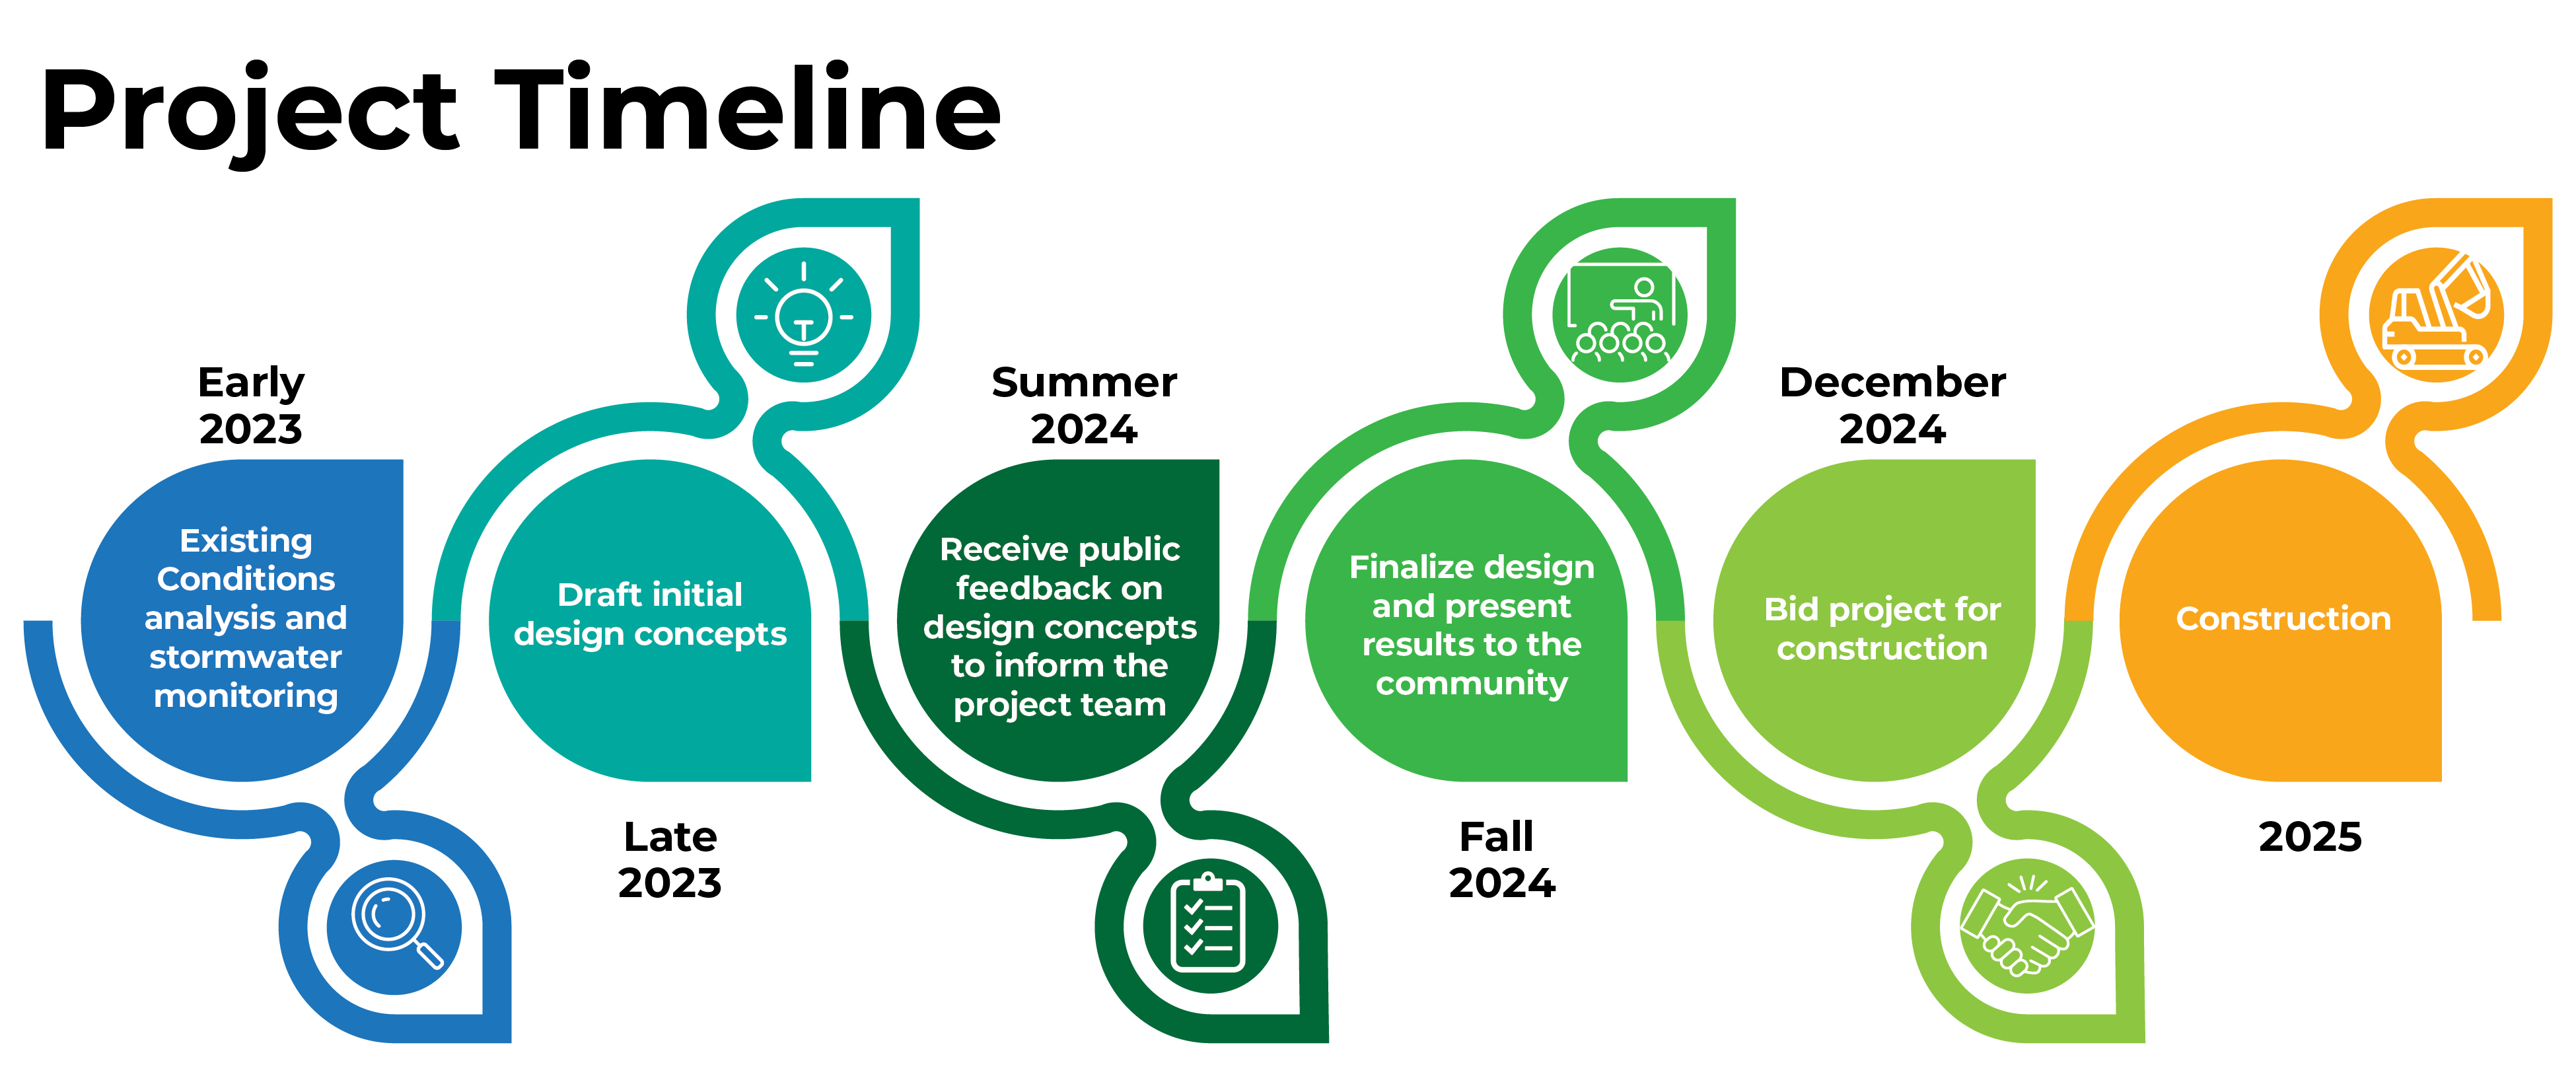 Project timeline graphic for stormwater management improvements.